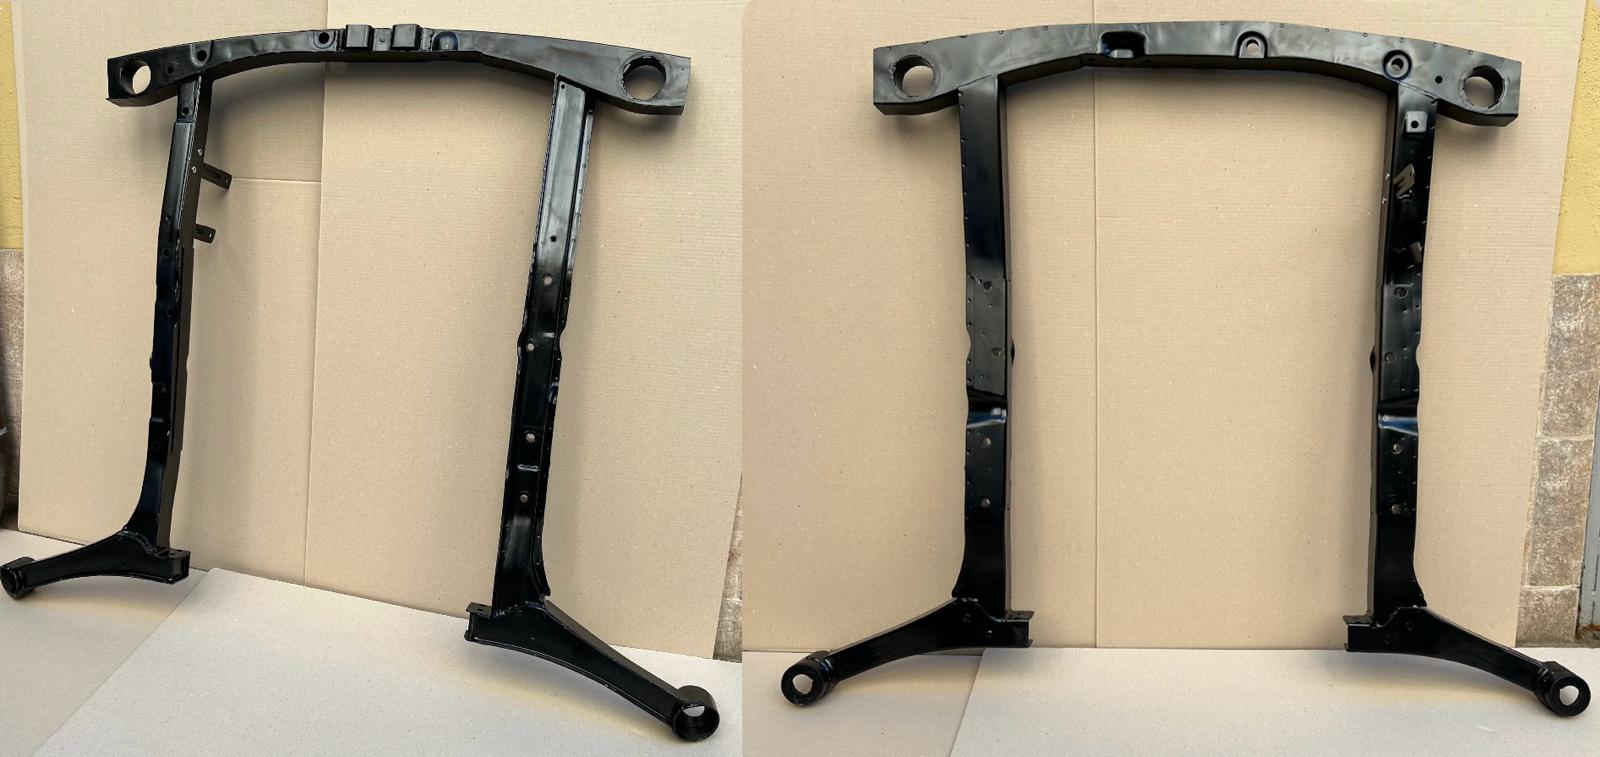 CAV743 - New chassis for Lancia Fulvia Coupè and Berlina. Produced on original Lancia draw. Available also with oil radiator support for first series models. Recommanded for racing purposes.